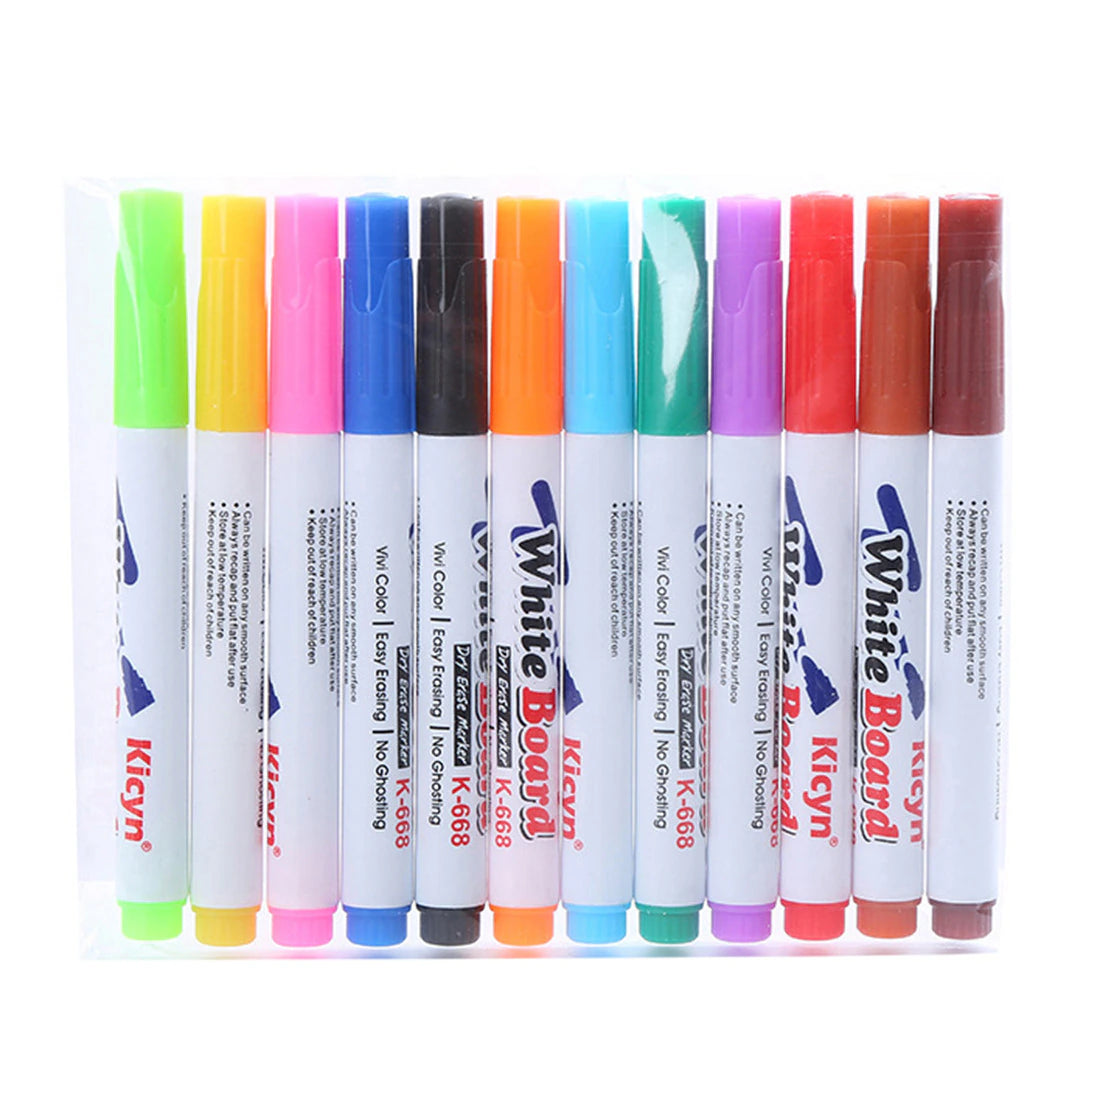 8/12 Colors Magical Water Painting Pen Set Water Floating Doodle Kids  Drawing Early Art Education Pens Magic Whiteboard Marker